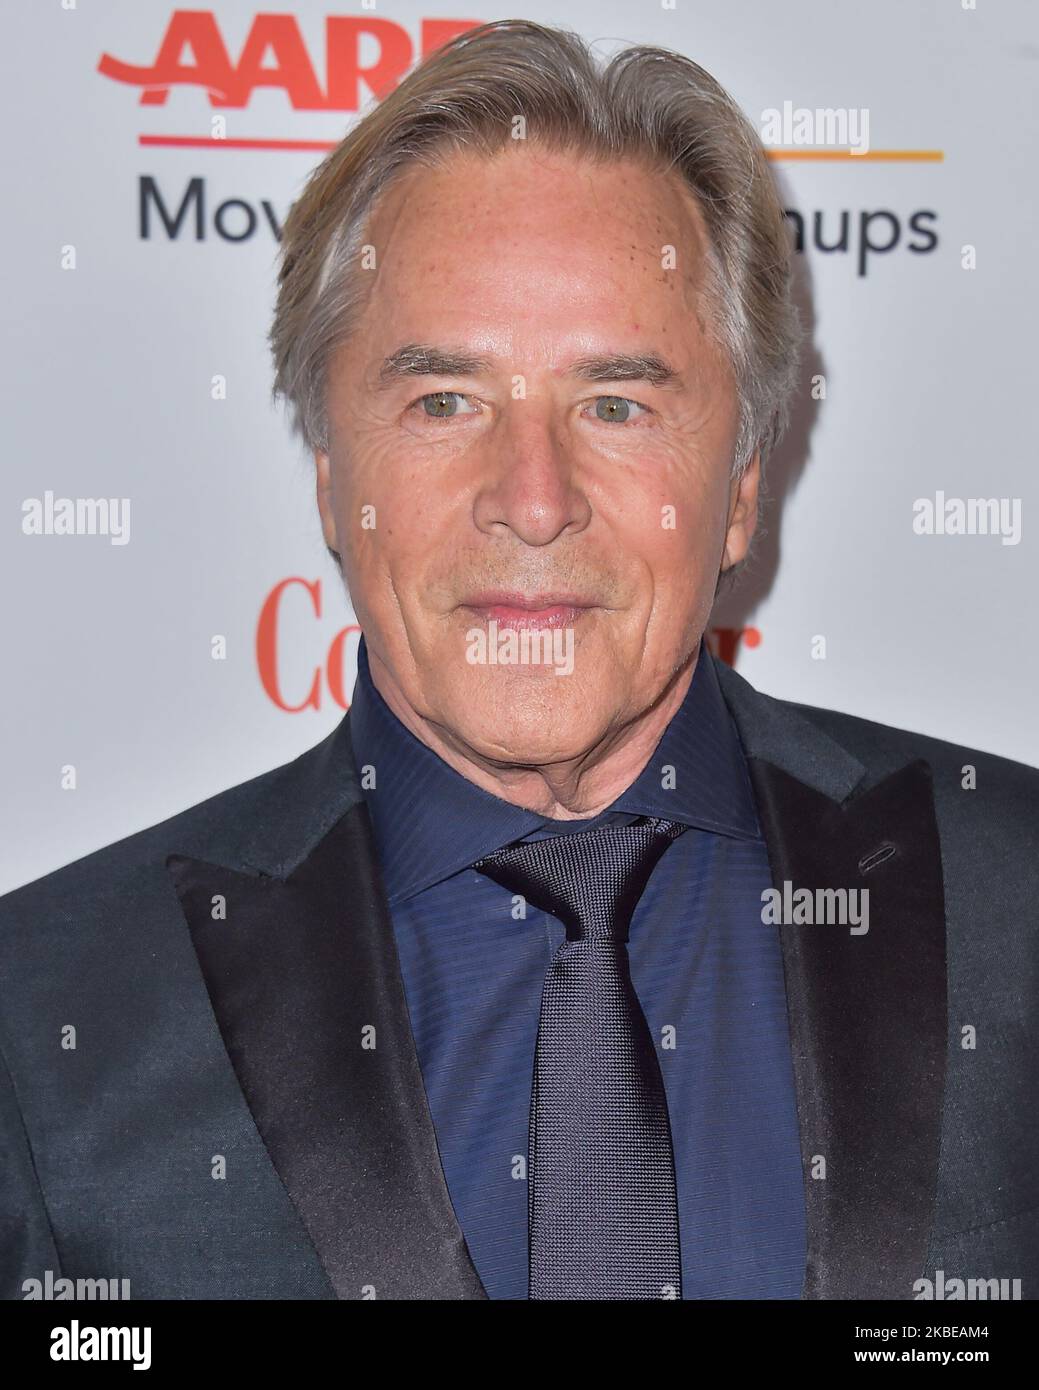 BEVERLY HILLS, LOS ANGELES, CALIFORNIA, USA - JANUARY 11: Don Johnson arrives at AARP The Magazine's 19th Annual Movies For Grownups Awards held at The Beverly Wilshire Four Seasons Hotel on January 11, 2020 in Beverly Hills, Los Angeles, California, United States. (Photo by Image Press Agency/NurPhoto) Stock Photo